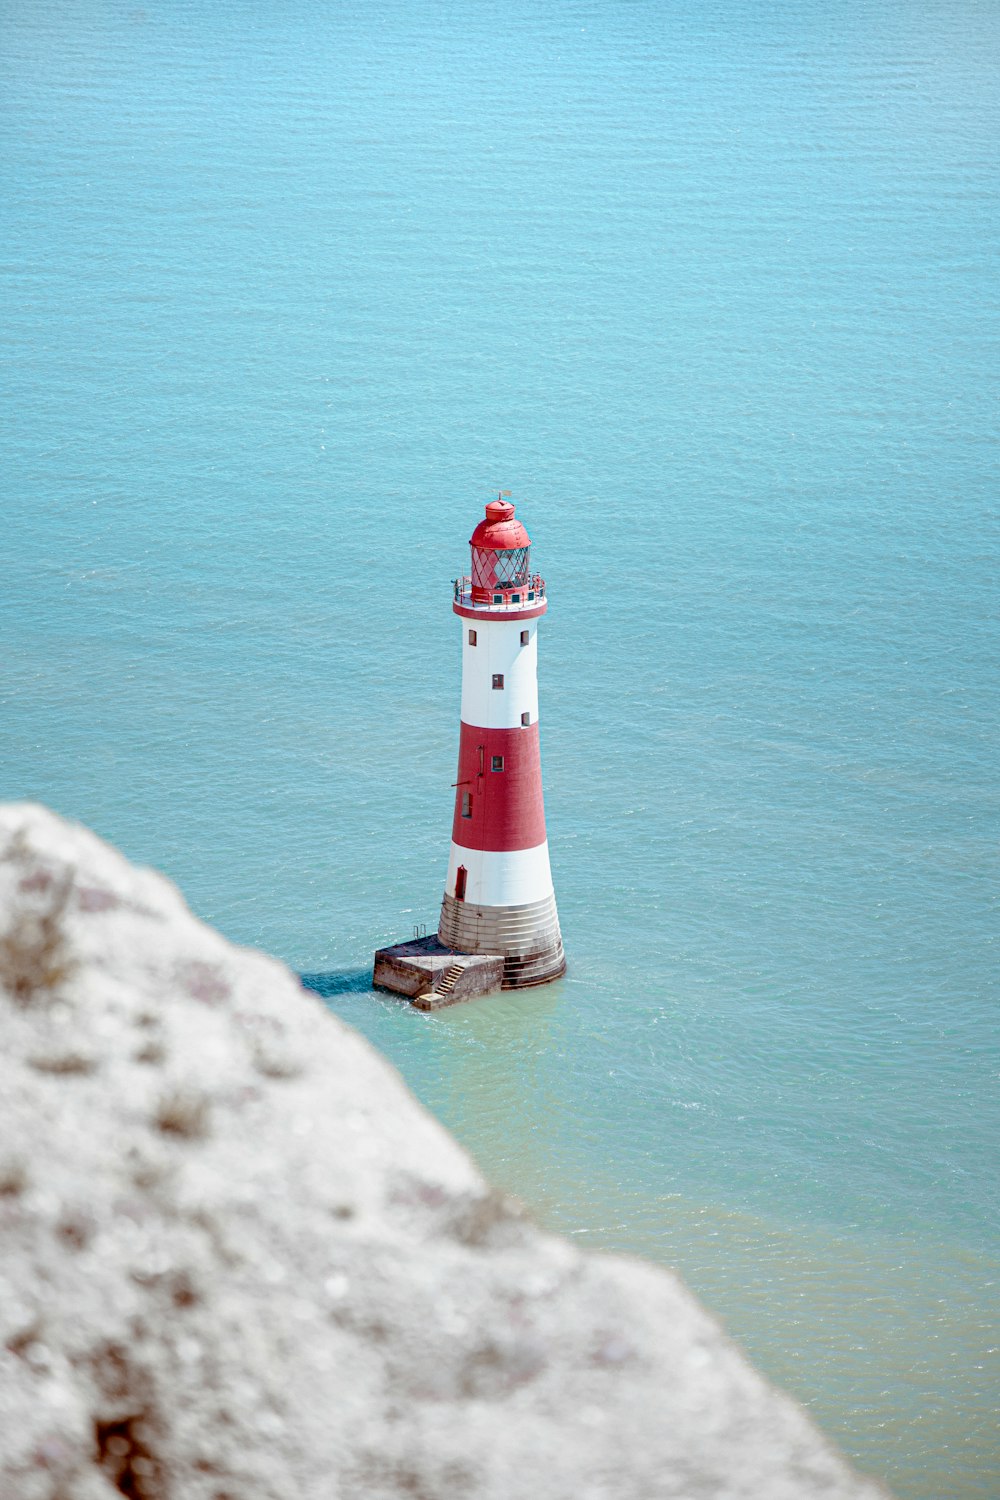 white and red lighthouse on rock formation beside body of water during daytime